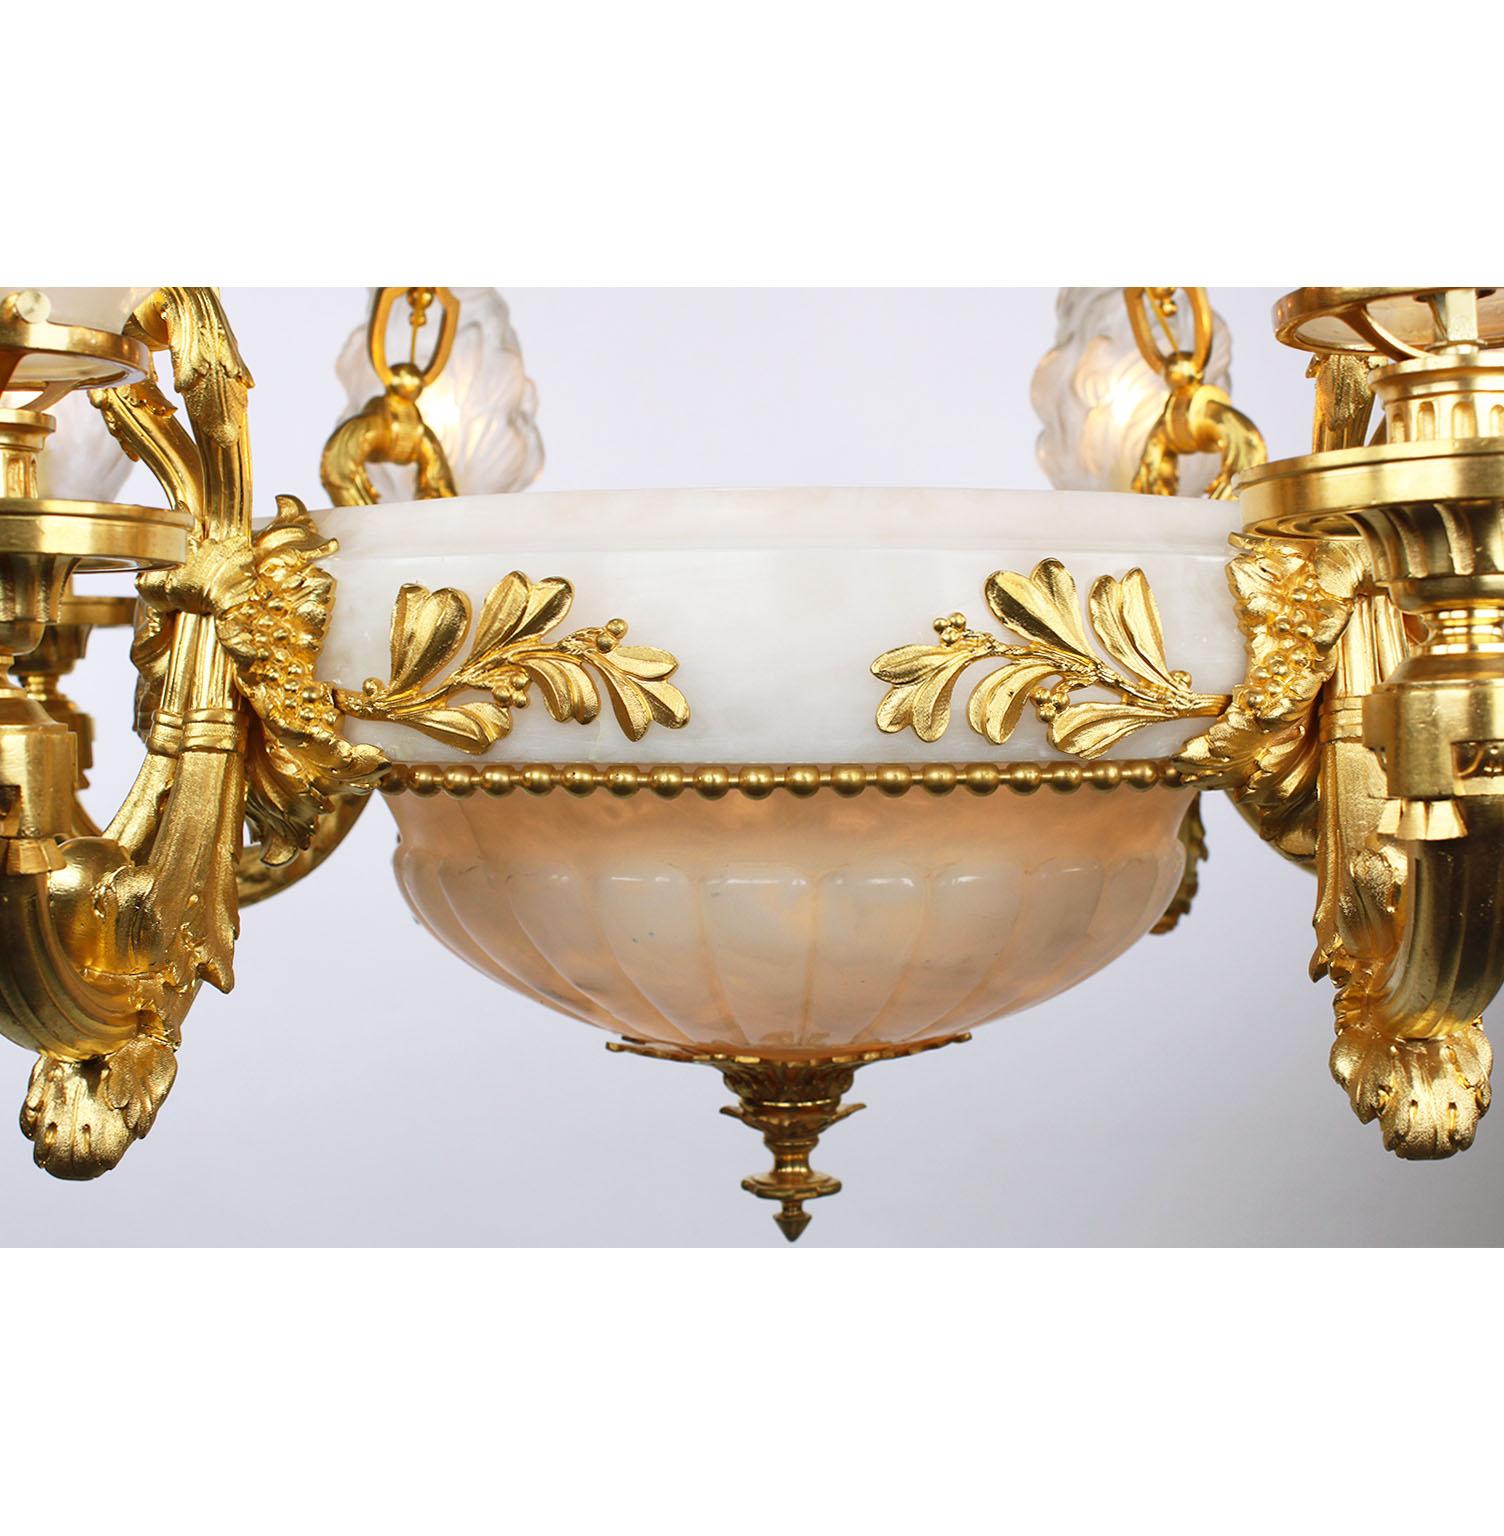 19th Century Franco-Russian Neoclassical Style Ormolu & Alabaster Chandelier For Sale 1